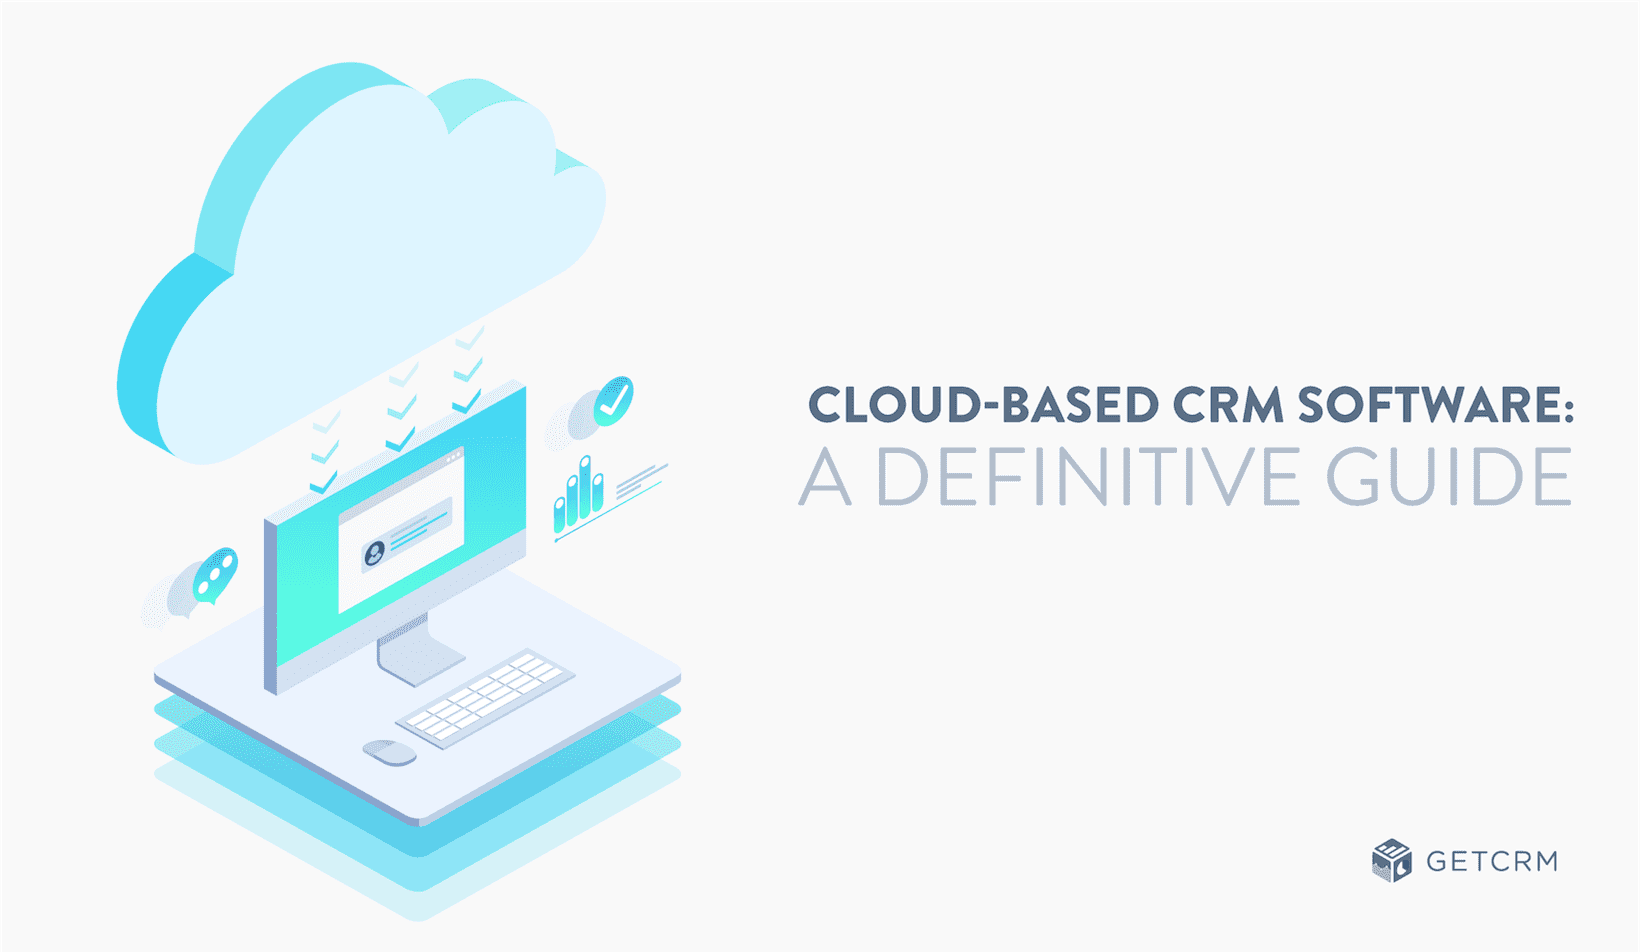 Cloud-based CRM Software